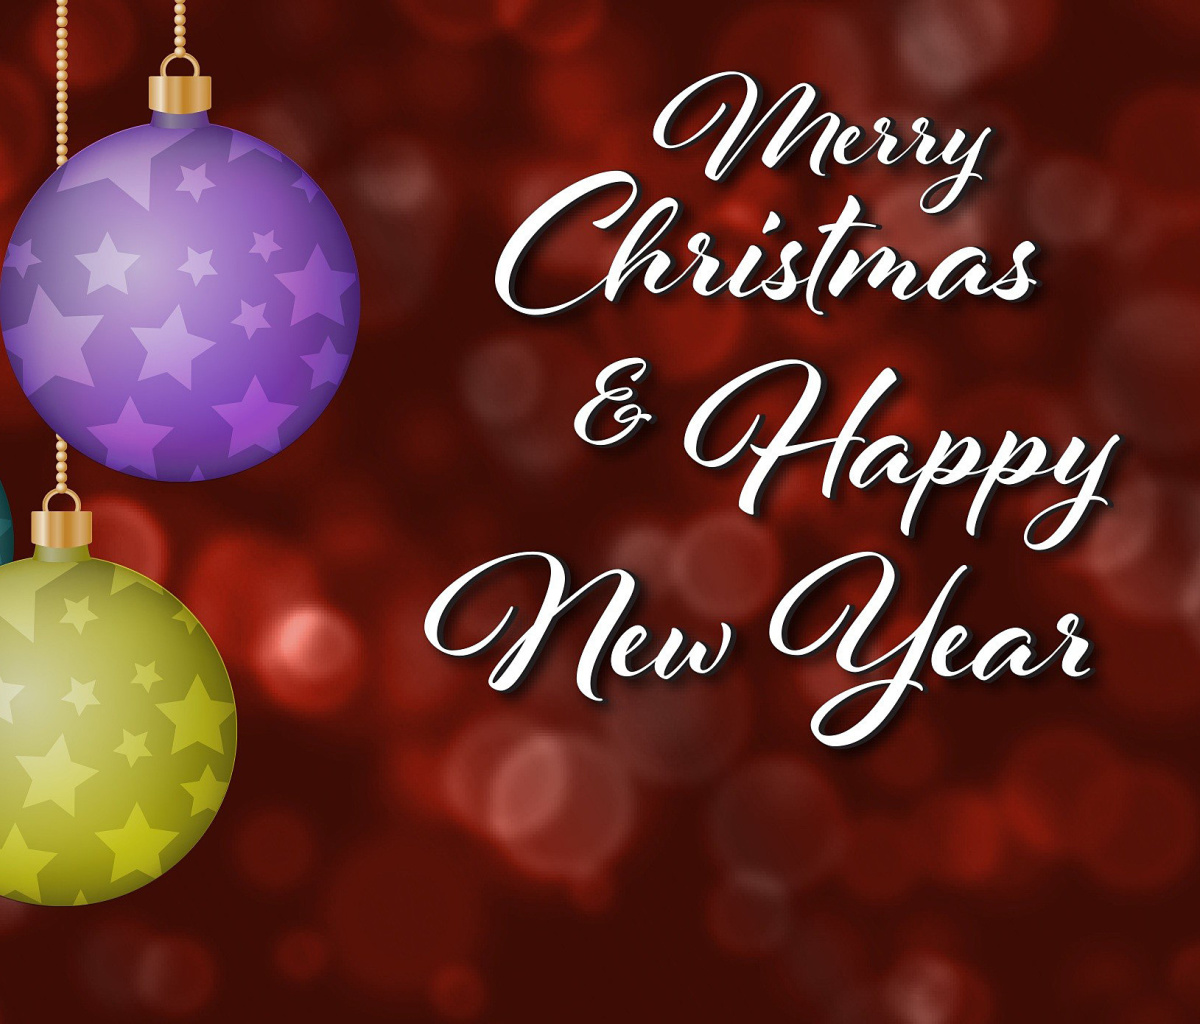 Обои Merry Christmas and Best Wishes for a Happy New Year 1200x1024